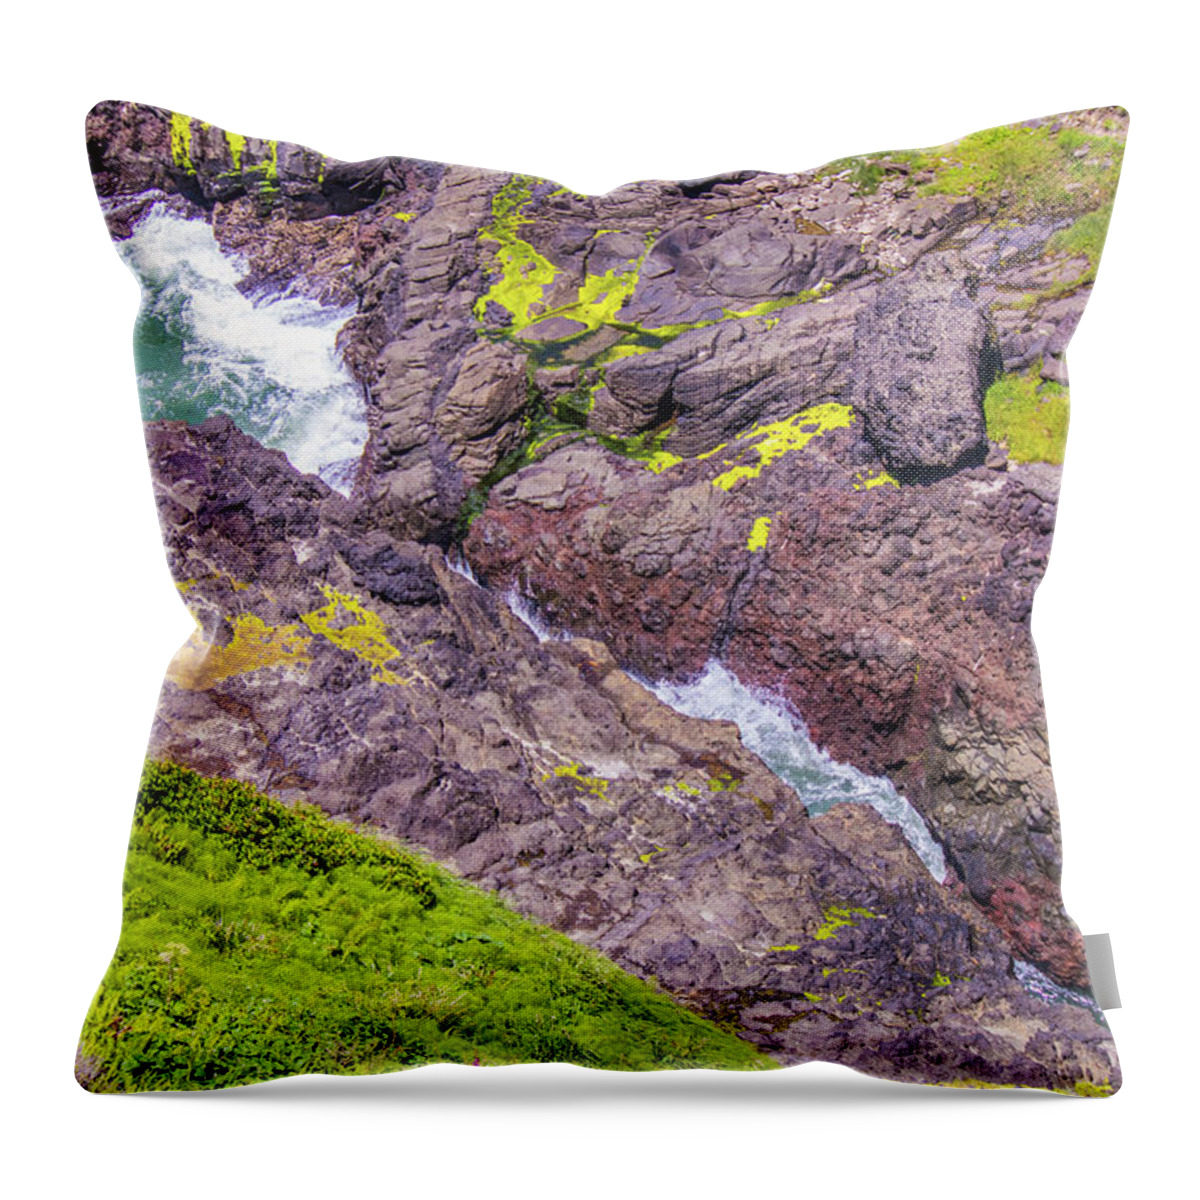 Oregon Throw Pillow featuring the photograph Devils Crack by Jonny D